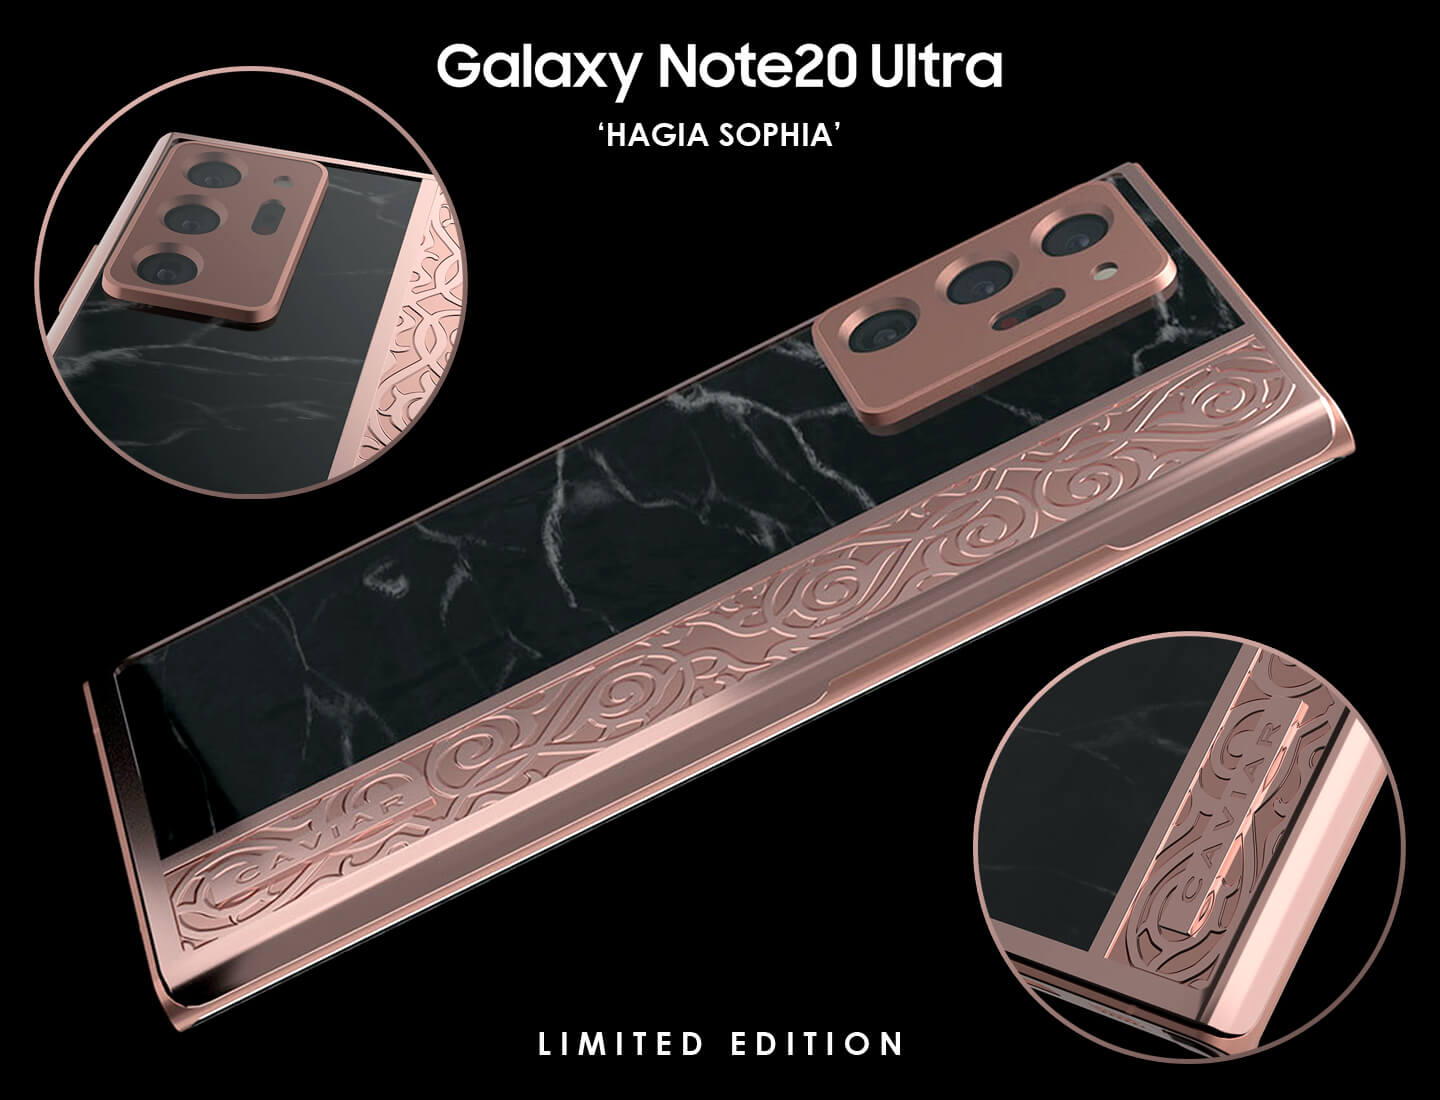 Galaxy Note 20 Ultra Limited Edition